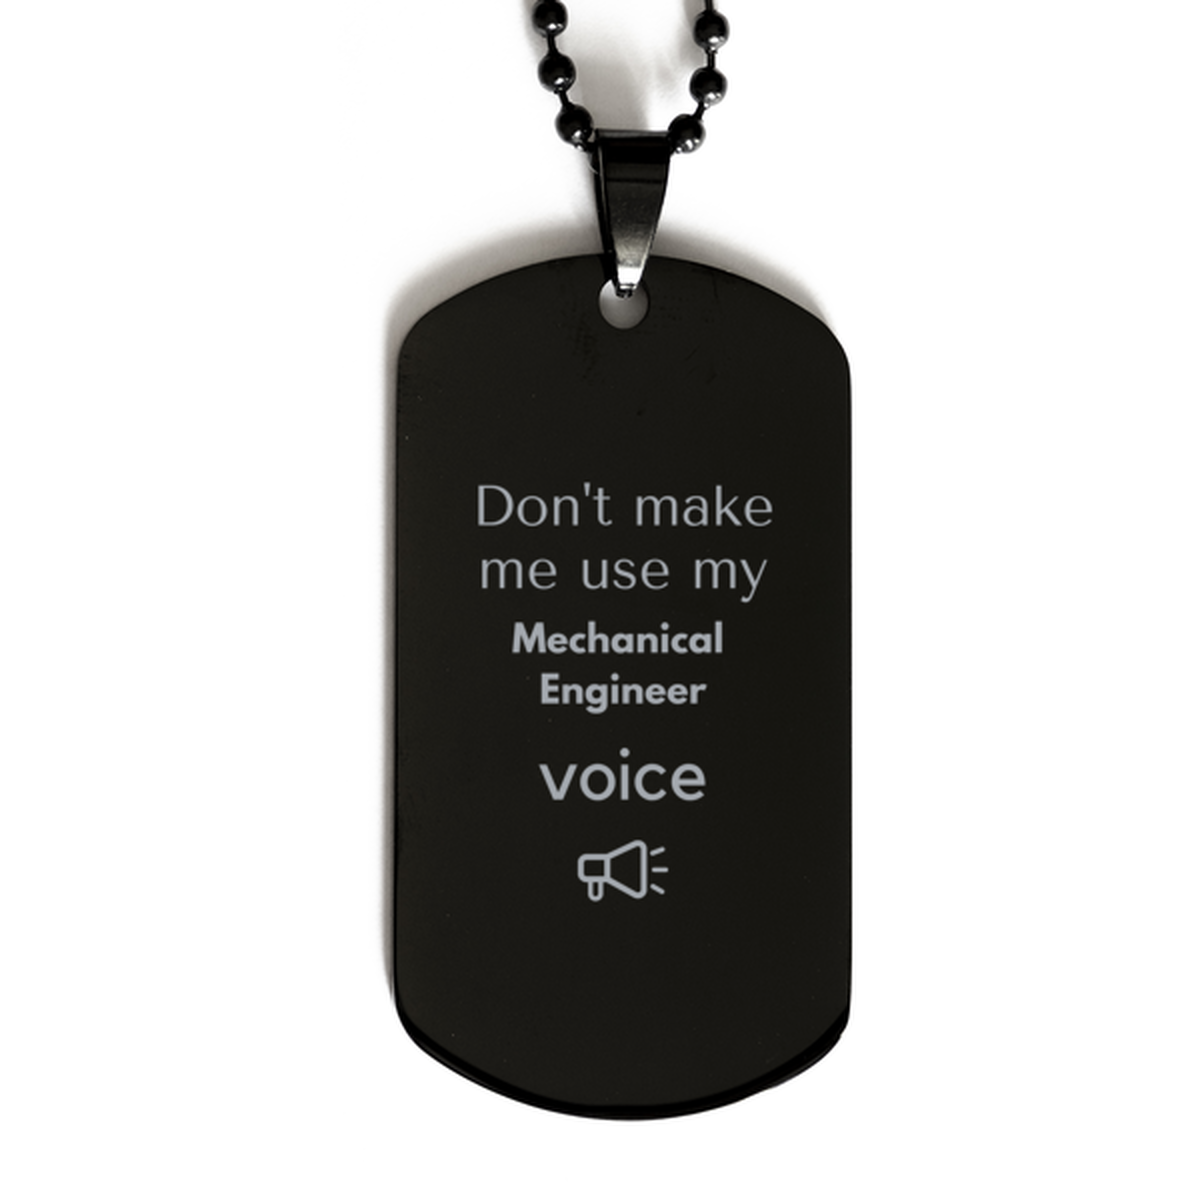 Don't make me use my Mechanical Engineer voice, Sarcasm Mechanical Engineer Gifts, Christmas Mechanical Engineer Black Dog Tag Birthday Unique Gifts For Mechanical Engineer Coworkers, Men, Women, Colleague, Friends